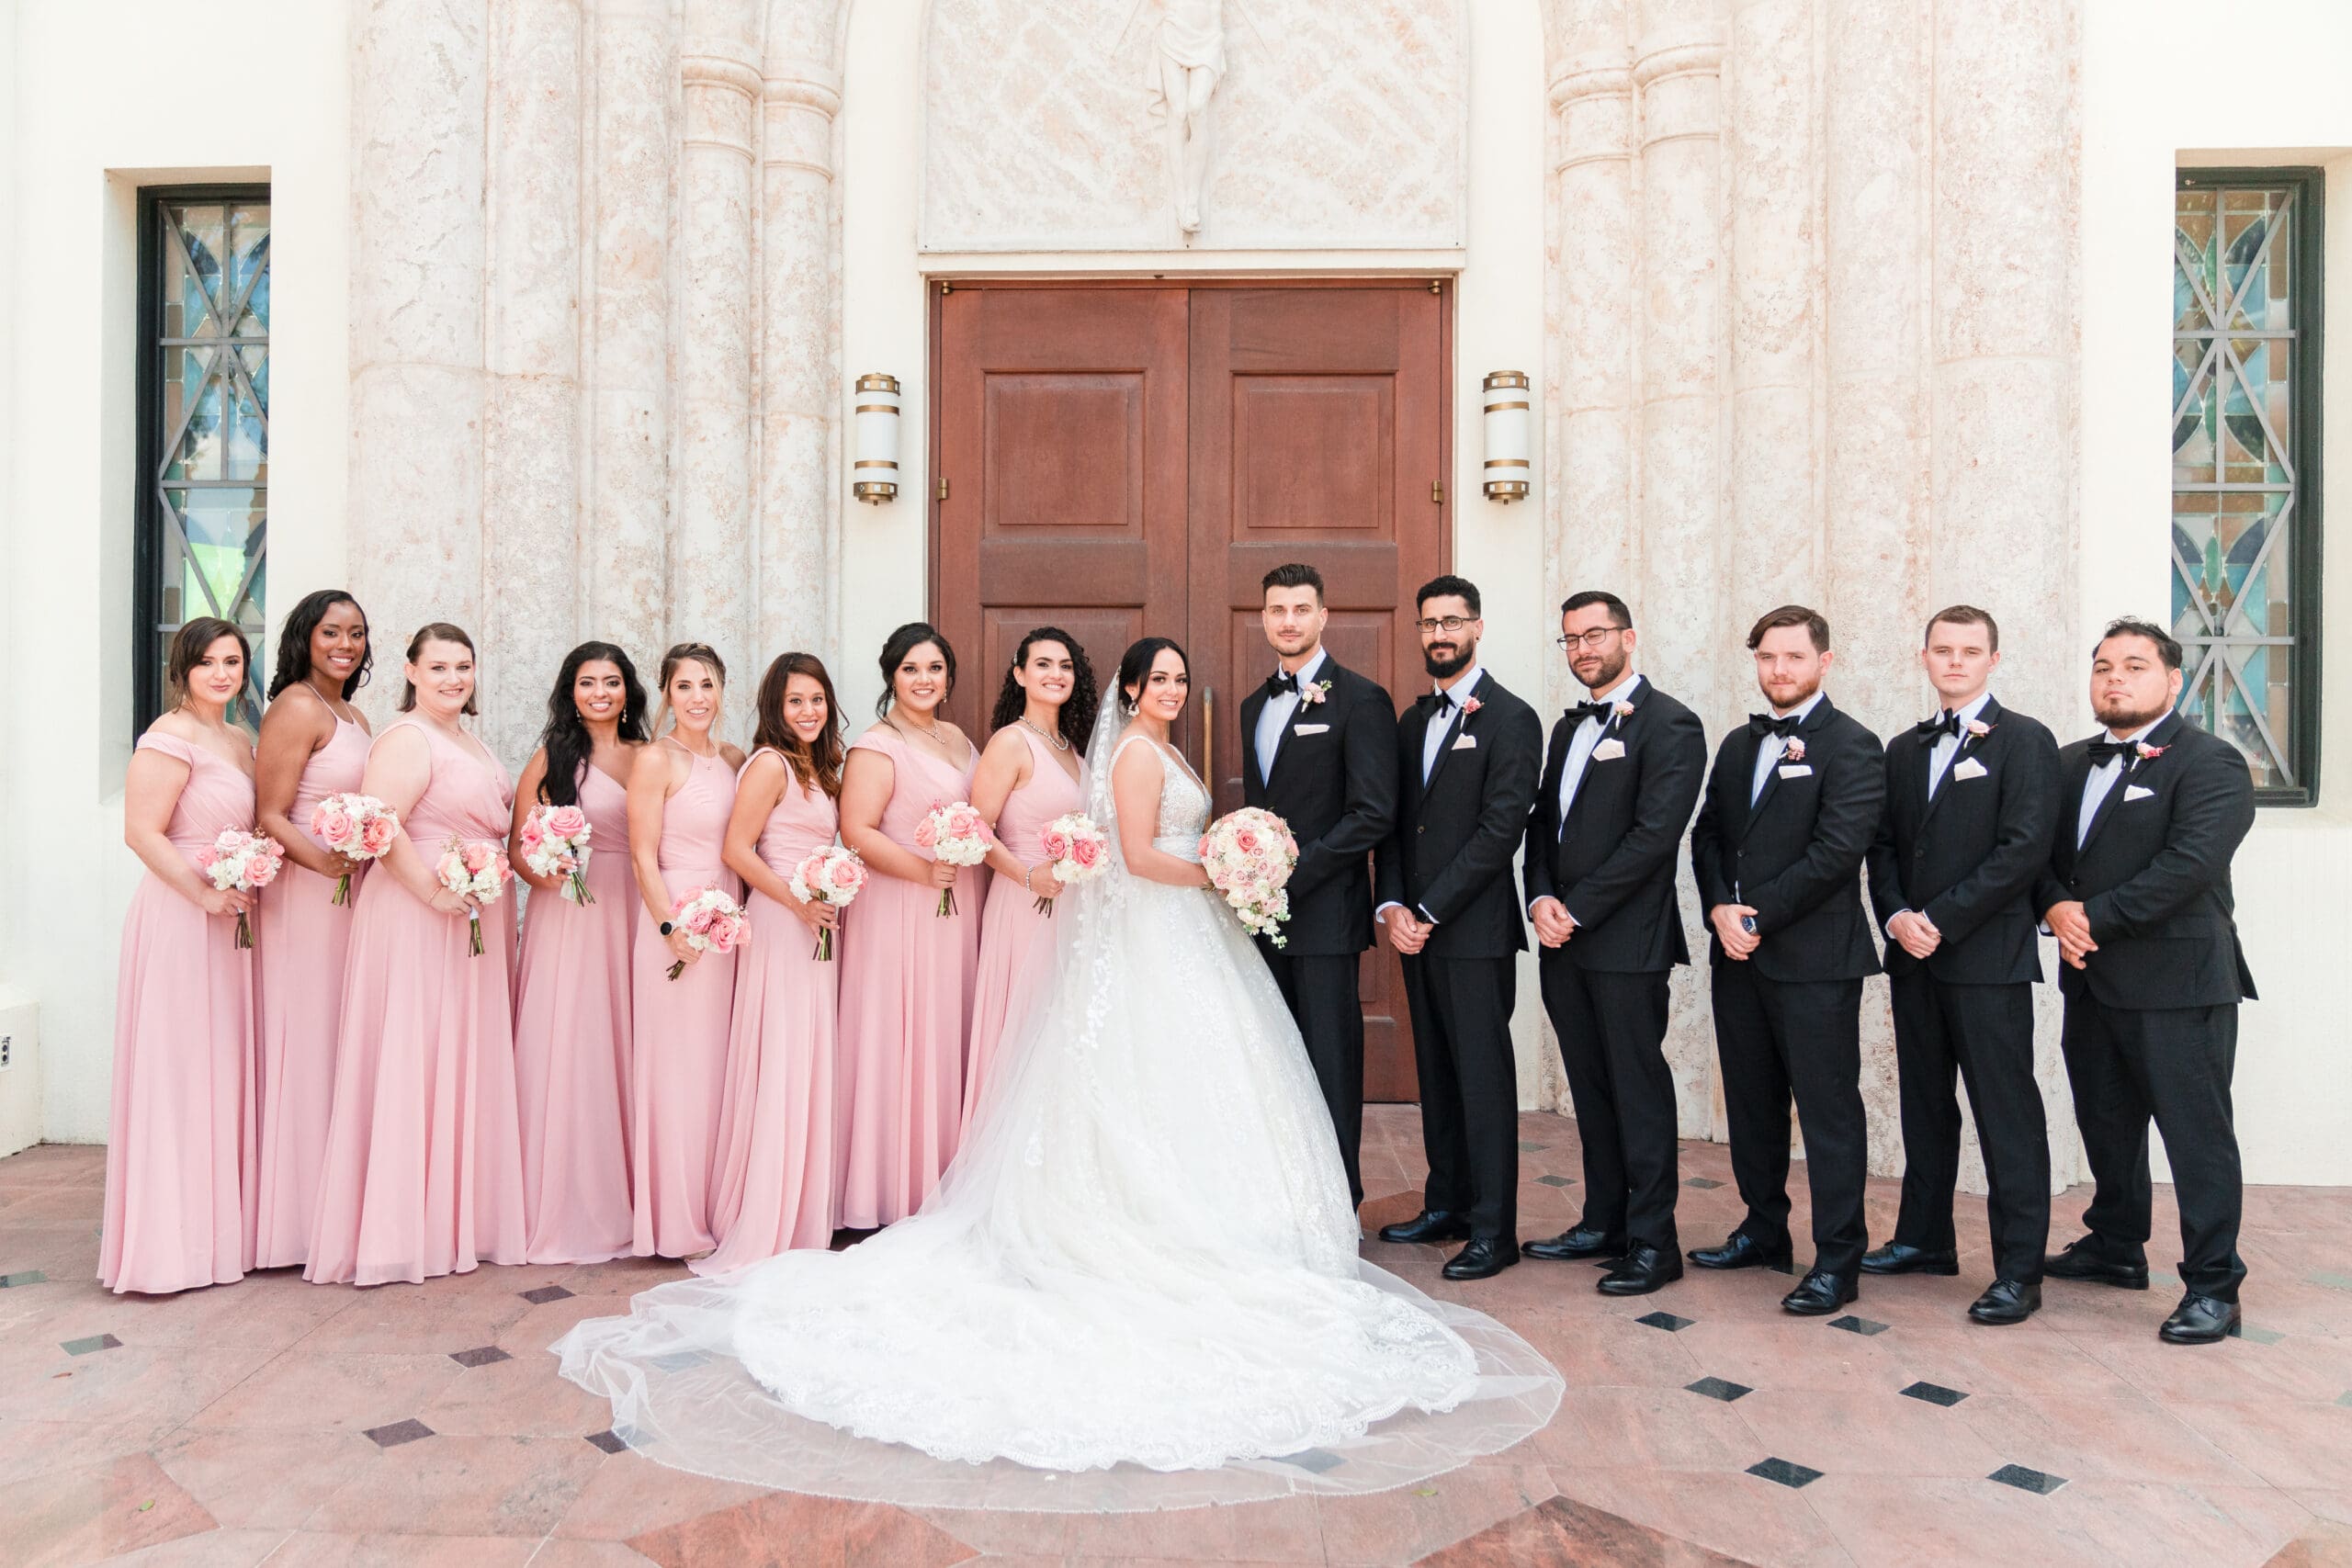 Bride and groom standing in front of St. James Cathedral with bridesmaids and groomsmen behind them, capturing a joyous moment of unity.